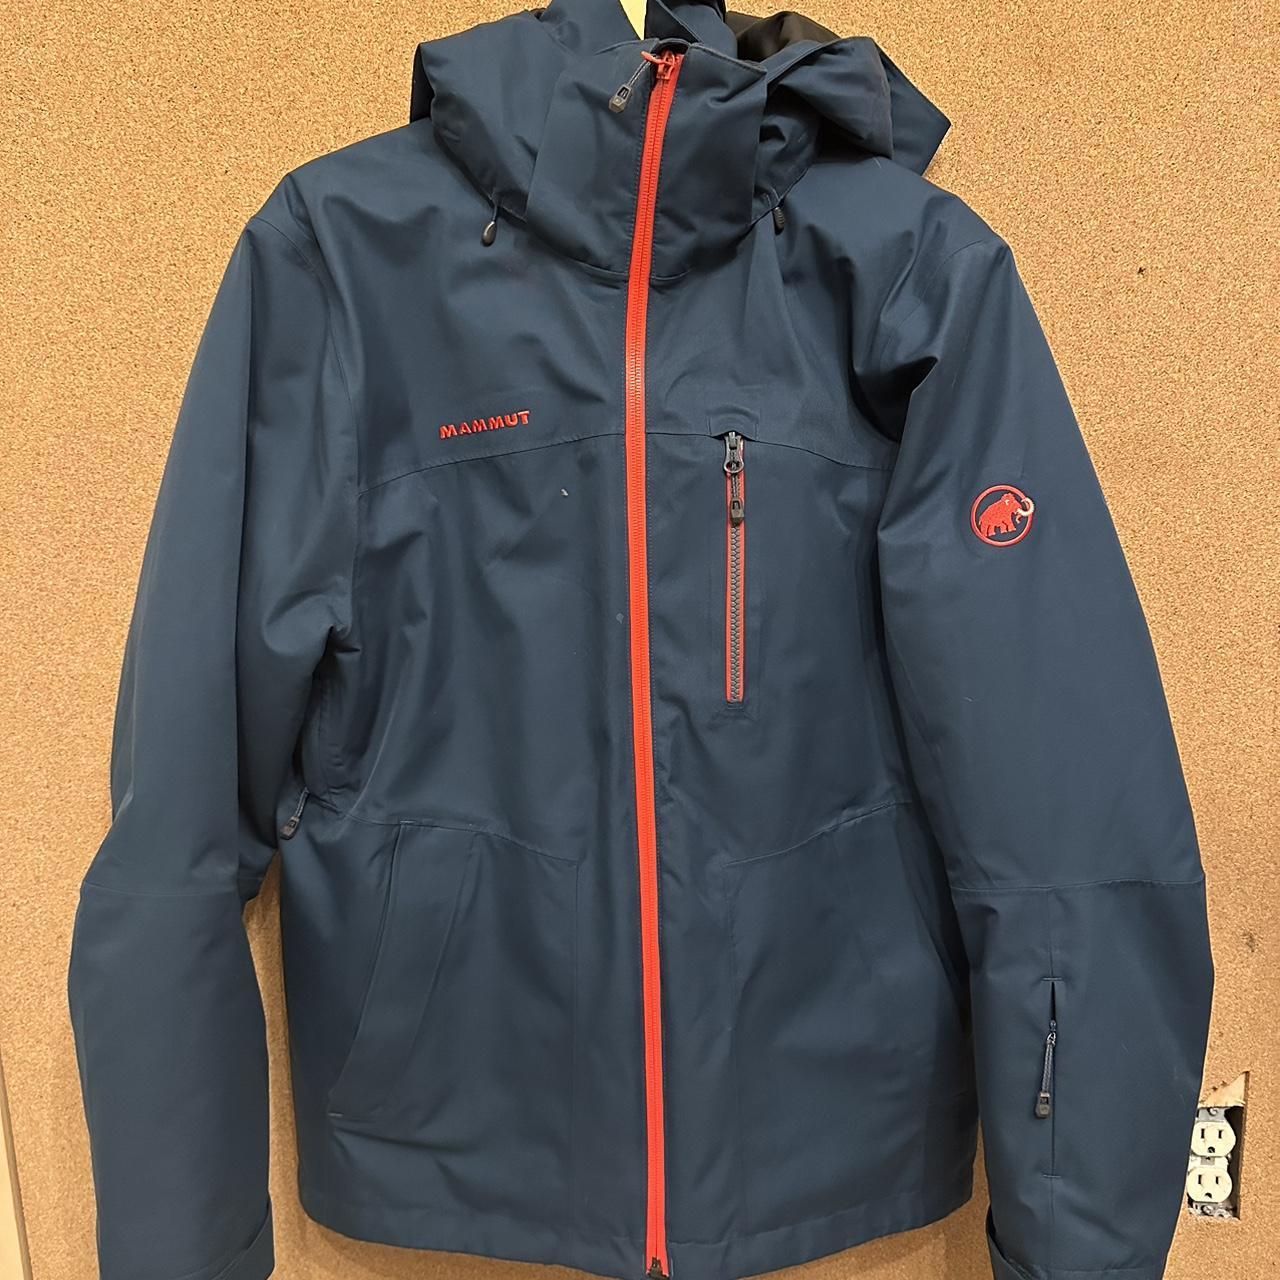 Mammut Men's Blue and Red Jacket